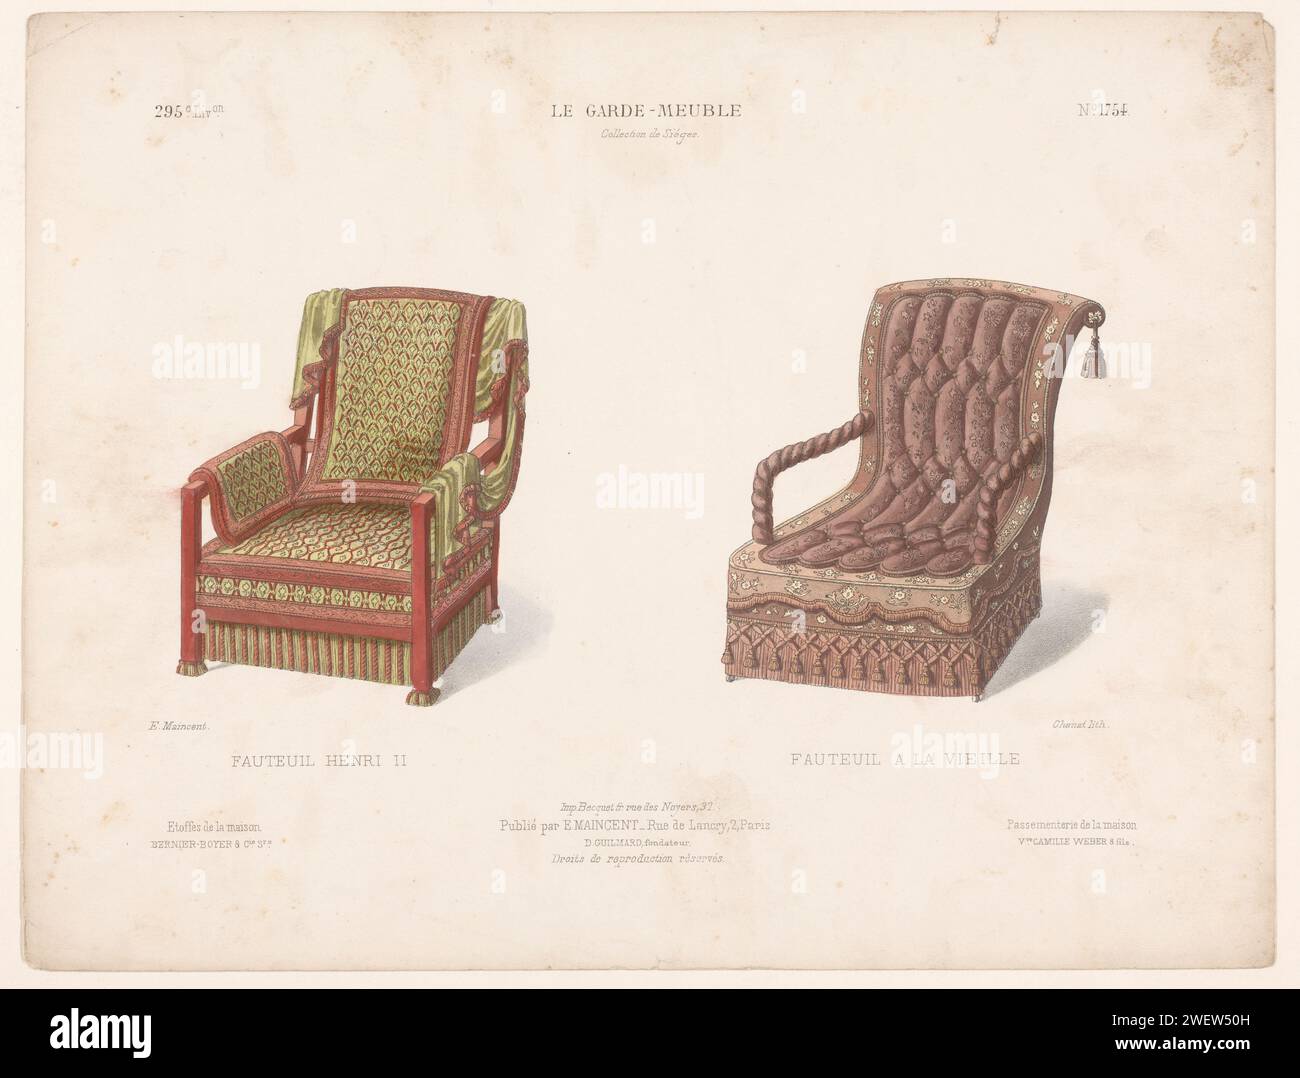 Two armchairs, Chanat, 1885 - 1895 print Two armchairs, one in the Hendrik II style. Print from 295th Livraison.  paper  seating furniture Stock Photo